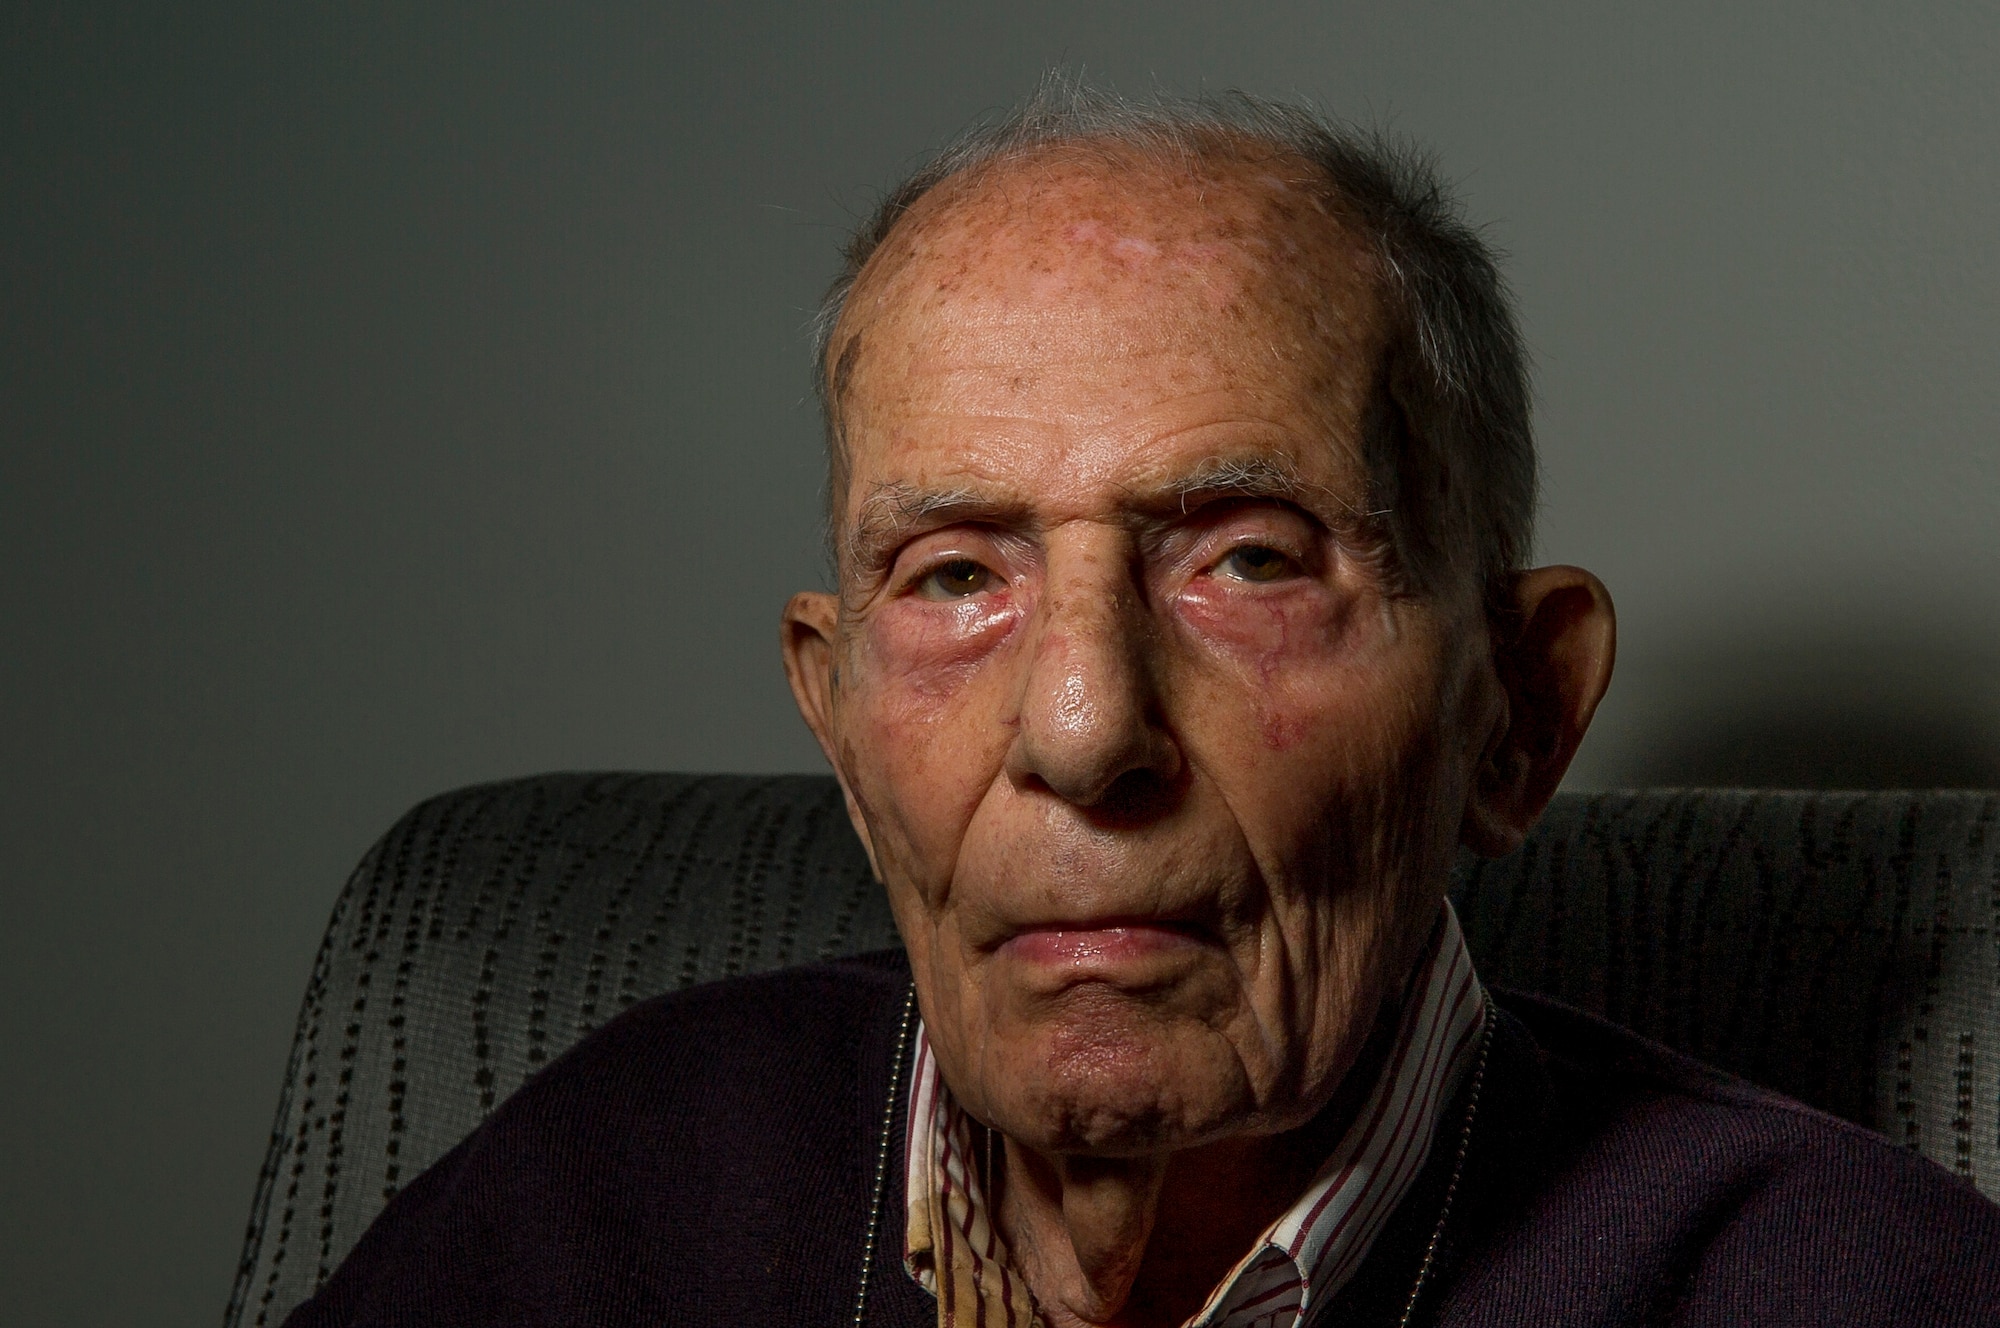 Bob Behr, 94, experienced the entire Holocaust from 1933 until he was liberated in 1945. Behr would eventually immigrate to the U.S., where he enlisted in the Army, and later worked for the Air Force as a civilian in the intelligence field for more than 35 years. (U.S. Air Force photo/Staff Sgt. Christopher Gross) 